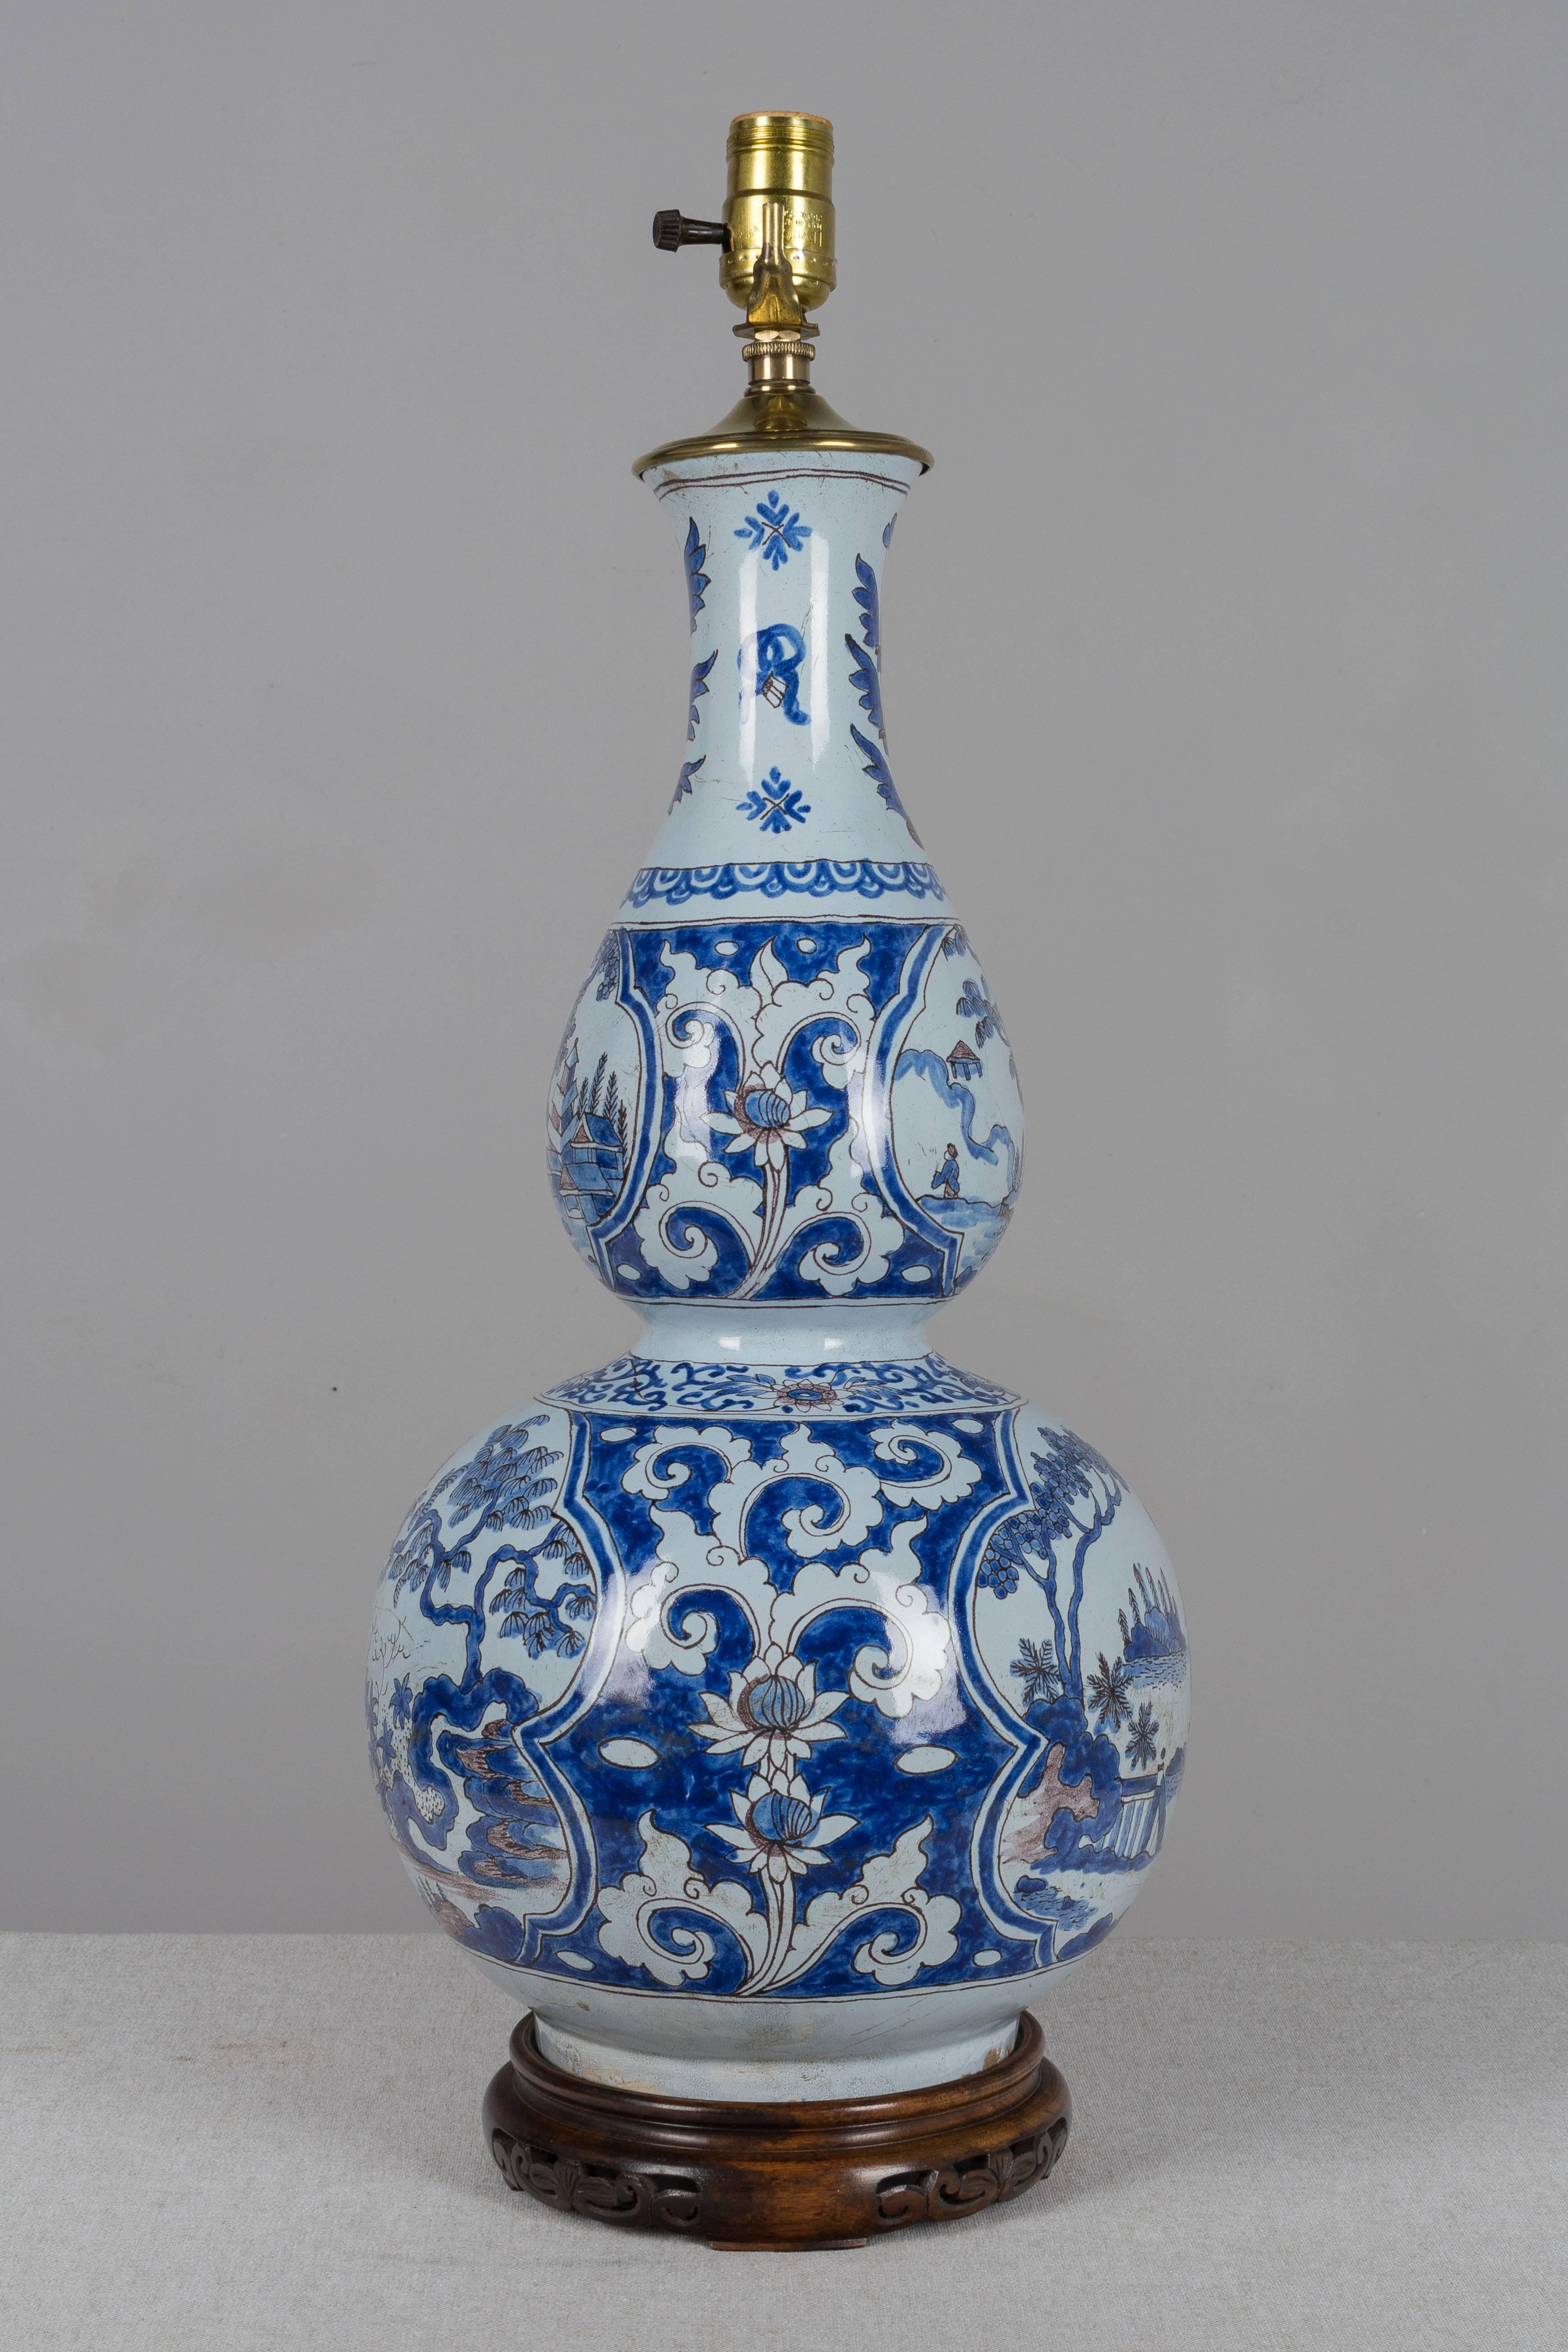 Chinoiserie 18th Century Delft Faience Lamp